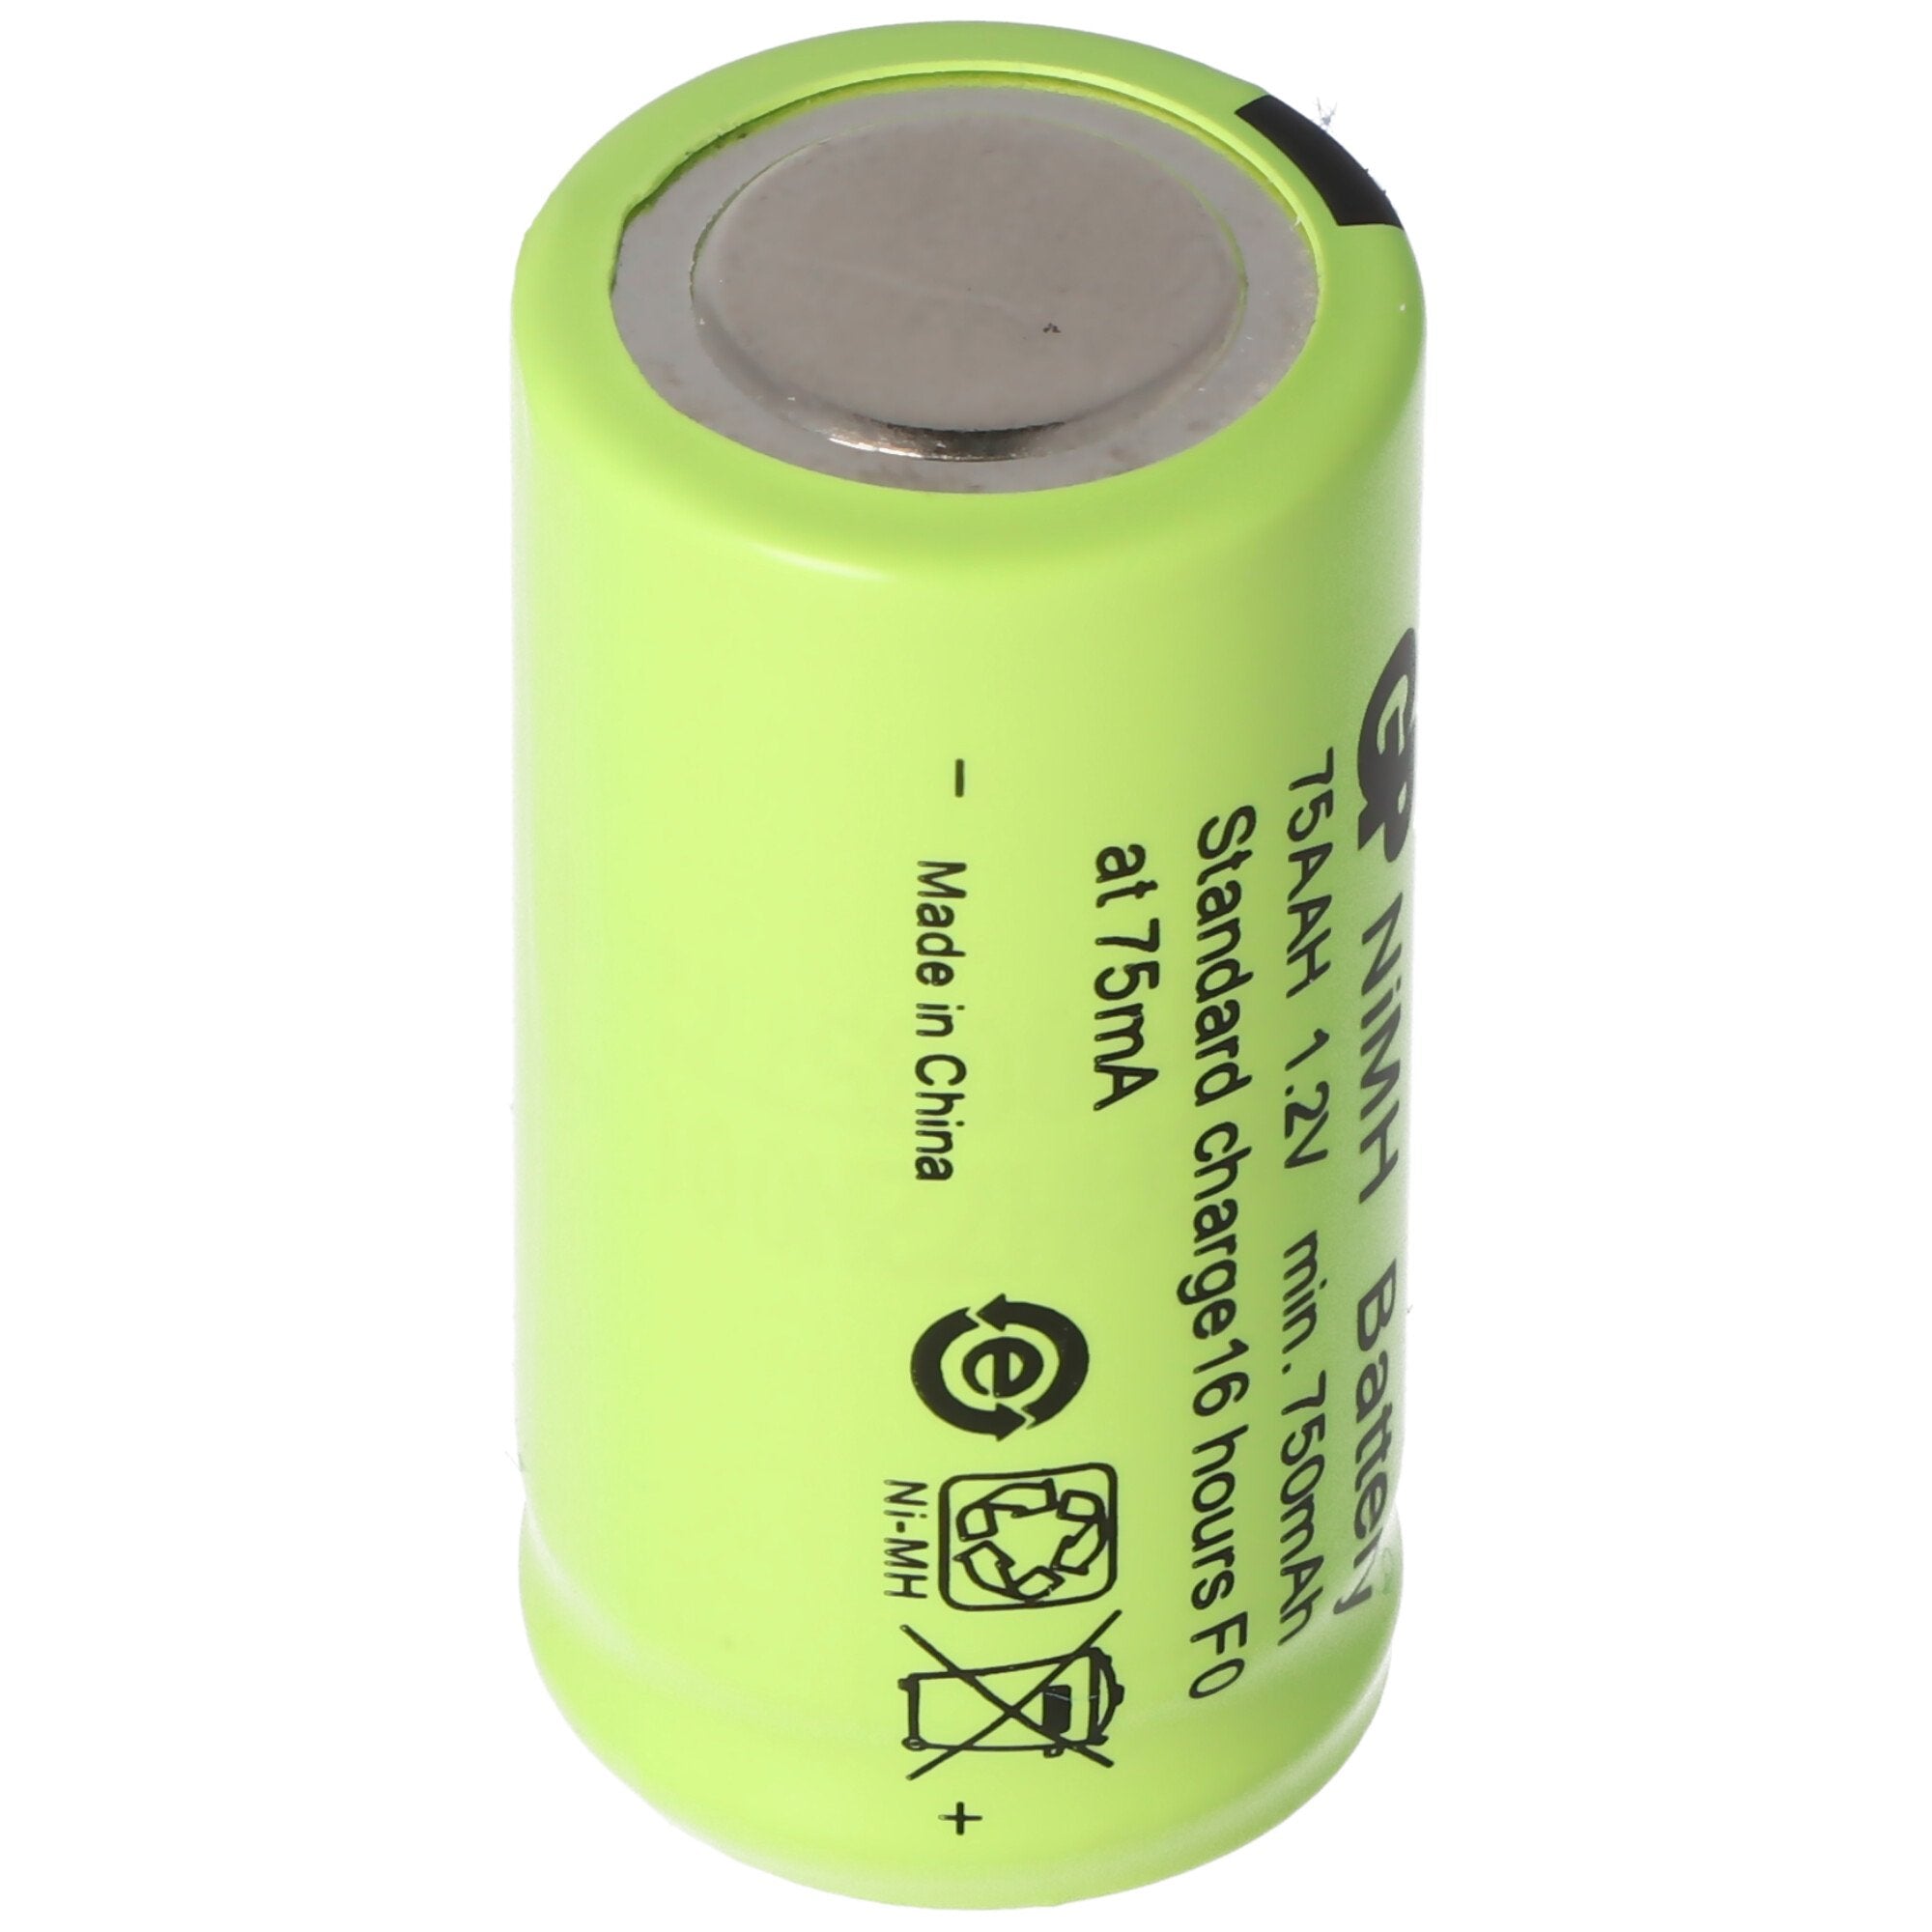 Battery 2 / 3AA NiMH battery without soldering tag, approx.14x29mm